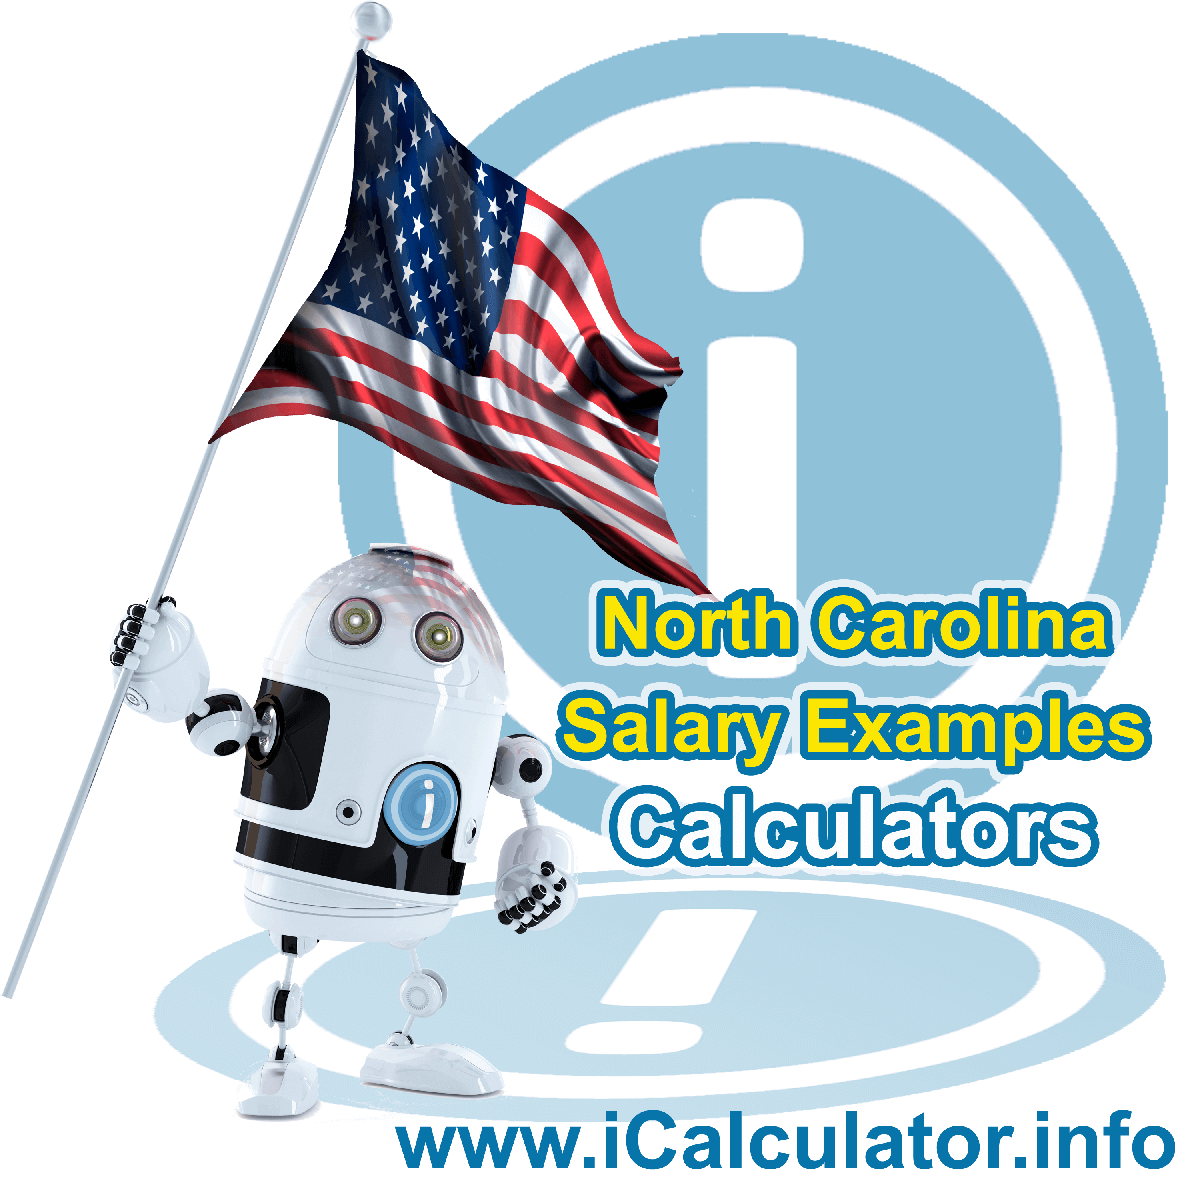 North Carolina Salary Example for $ 55,000.00 in 2023 | iCalculator™ | $ 55,000.00 salary example for employee and employer paying North Carolina State tincome taxes. Detailed salary after tax calculation including North Carolina State Tax, Federal State Tax, Medicare Deductions, Social Security, Capital Gains and other income tax and salary deductions complete with supporting North Carolina state tax tables 